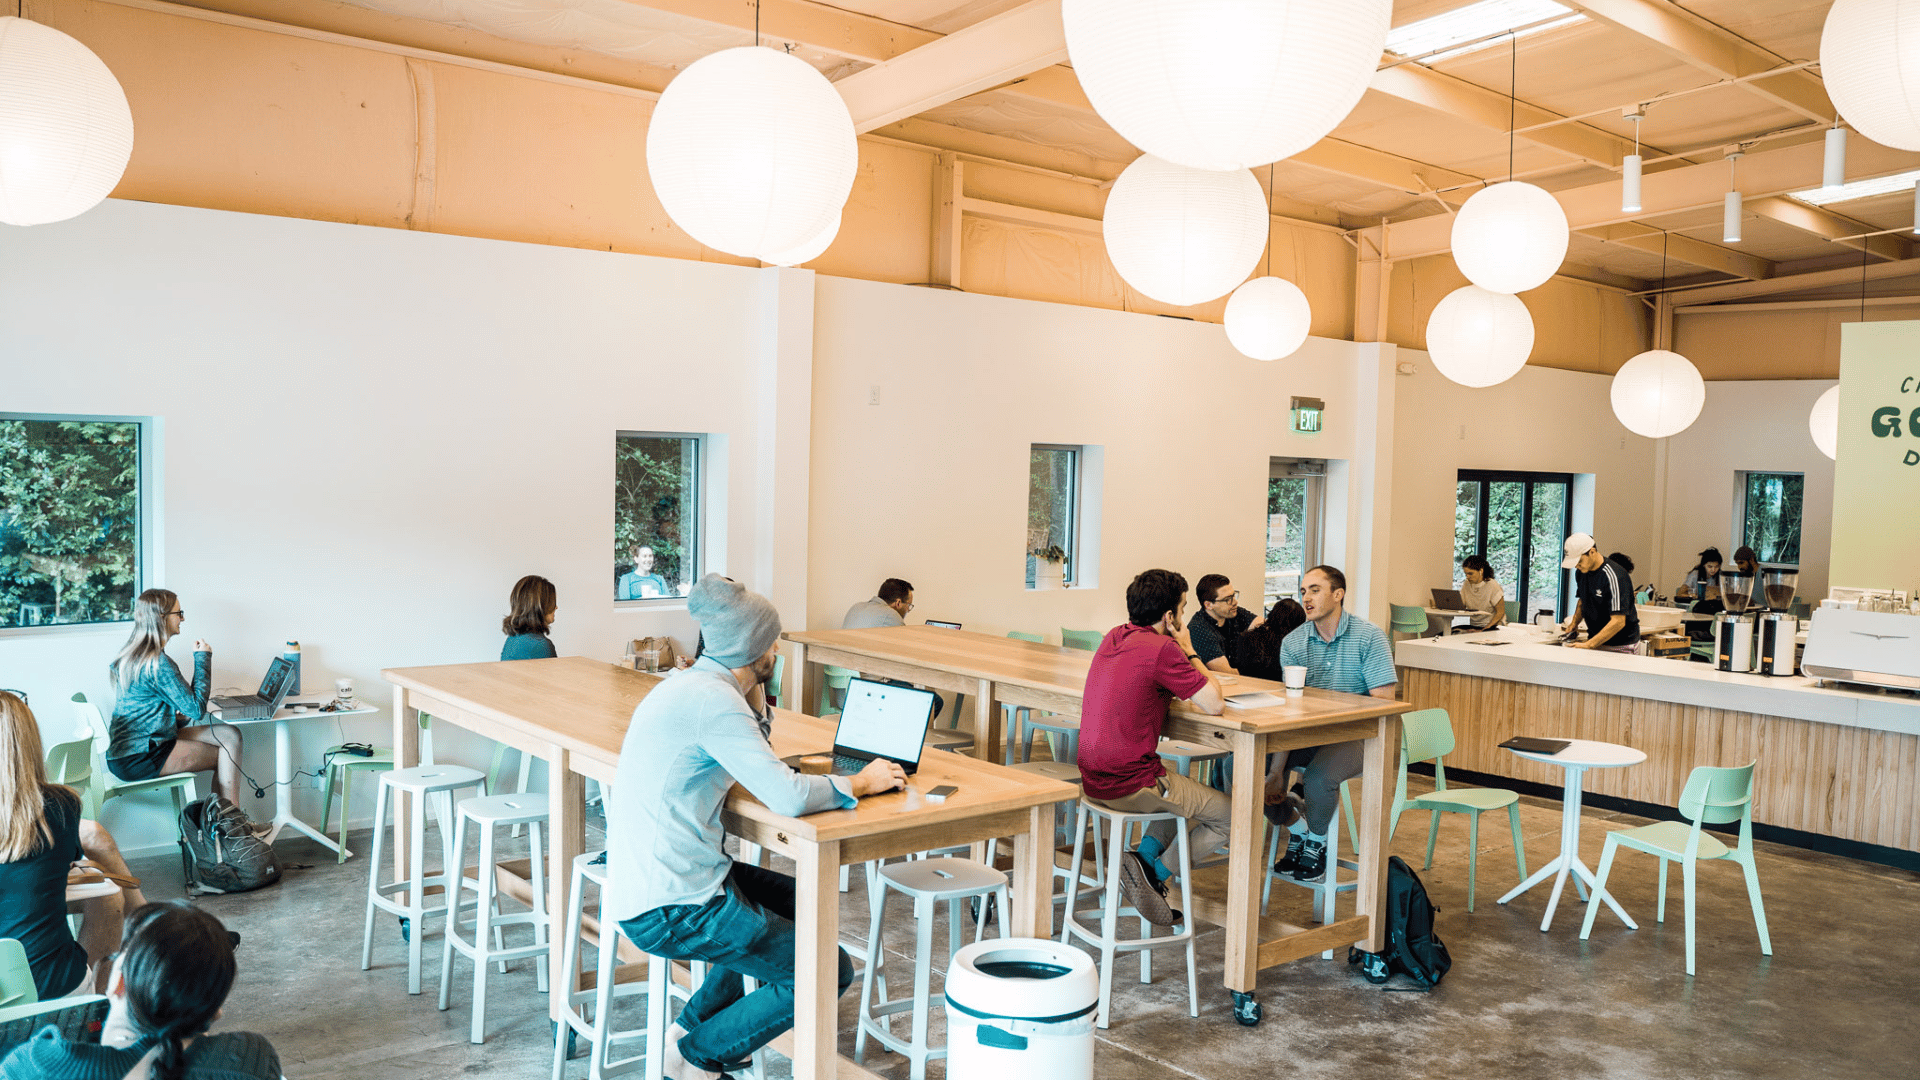 The Coolest Coffee Shops in the U.S.